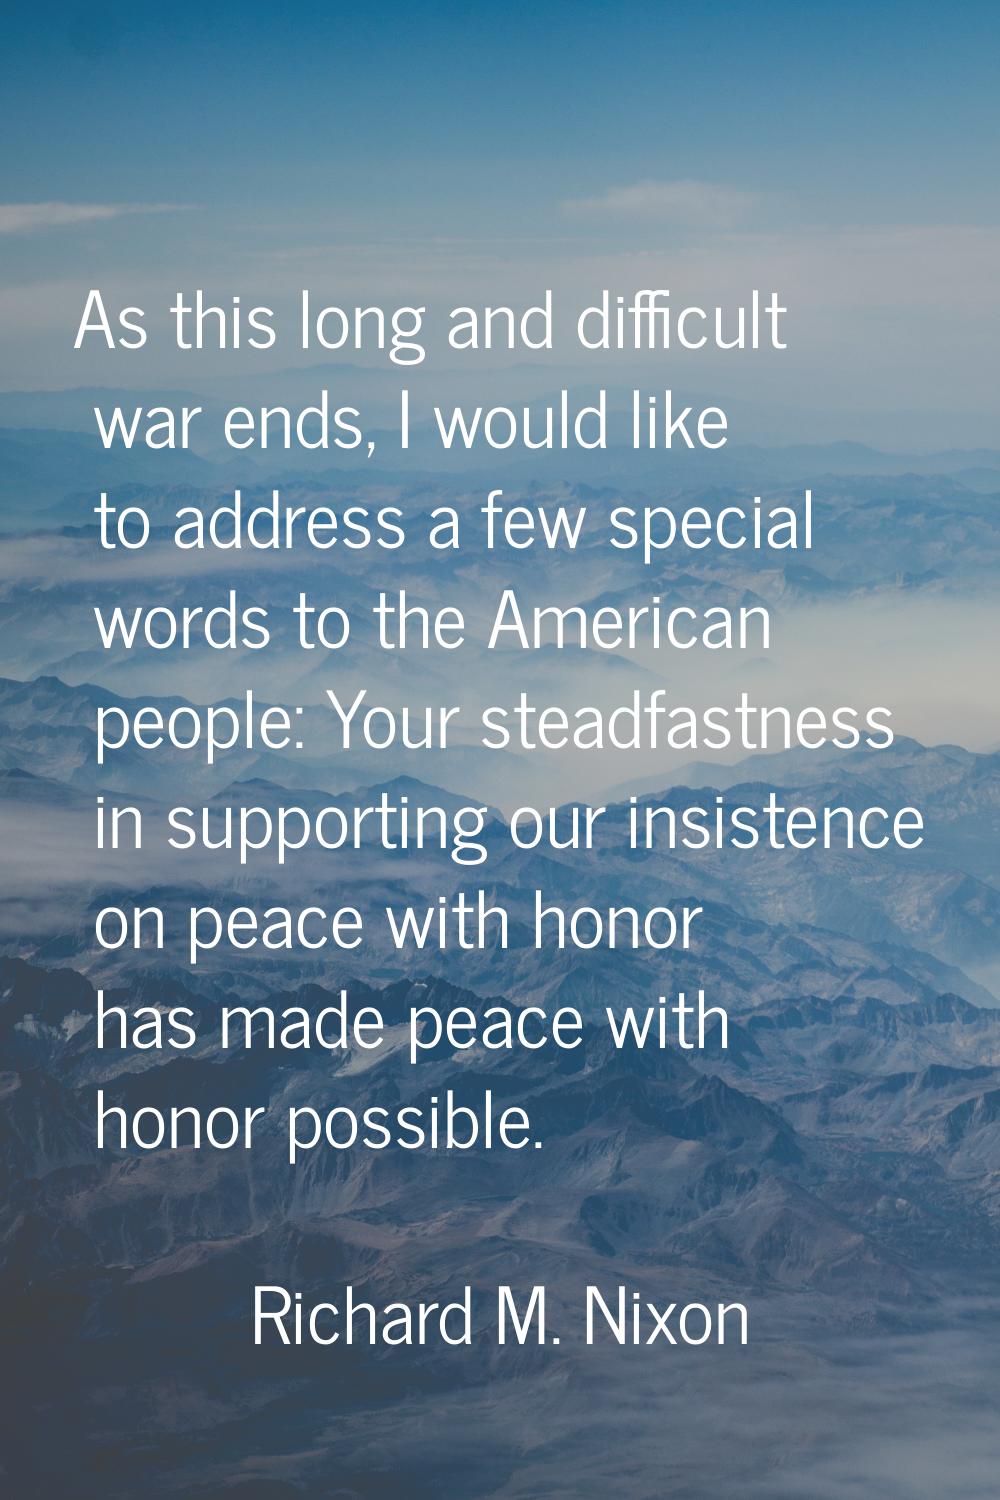 As this long and difficult war ends, I would like to address a few special words to the American pe